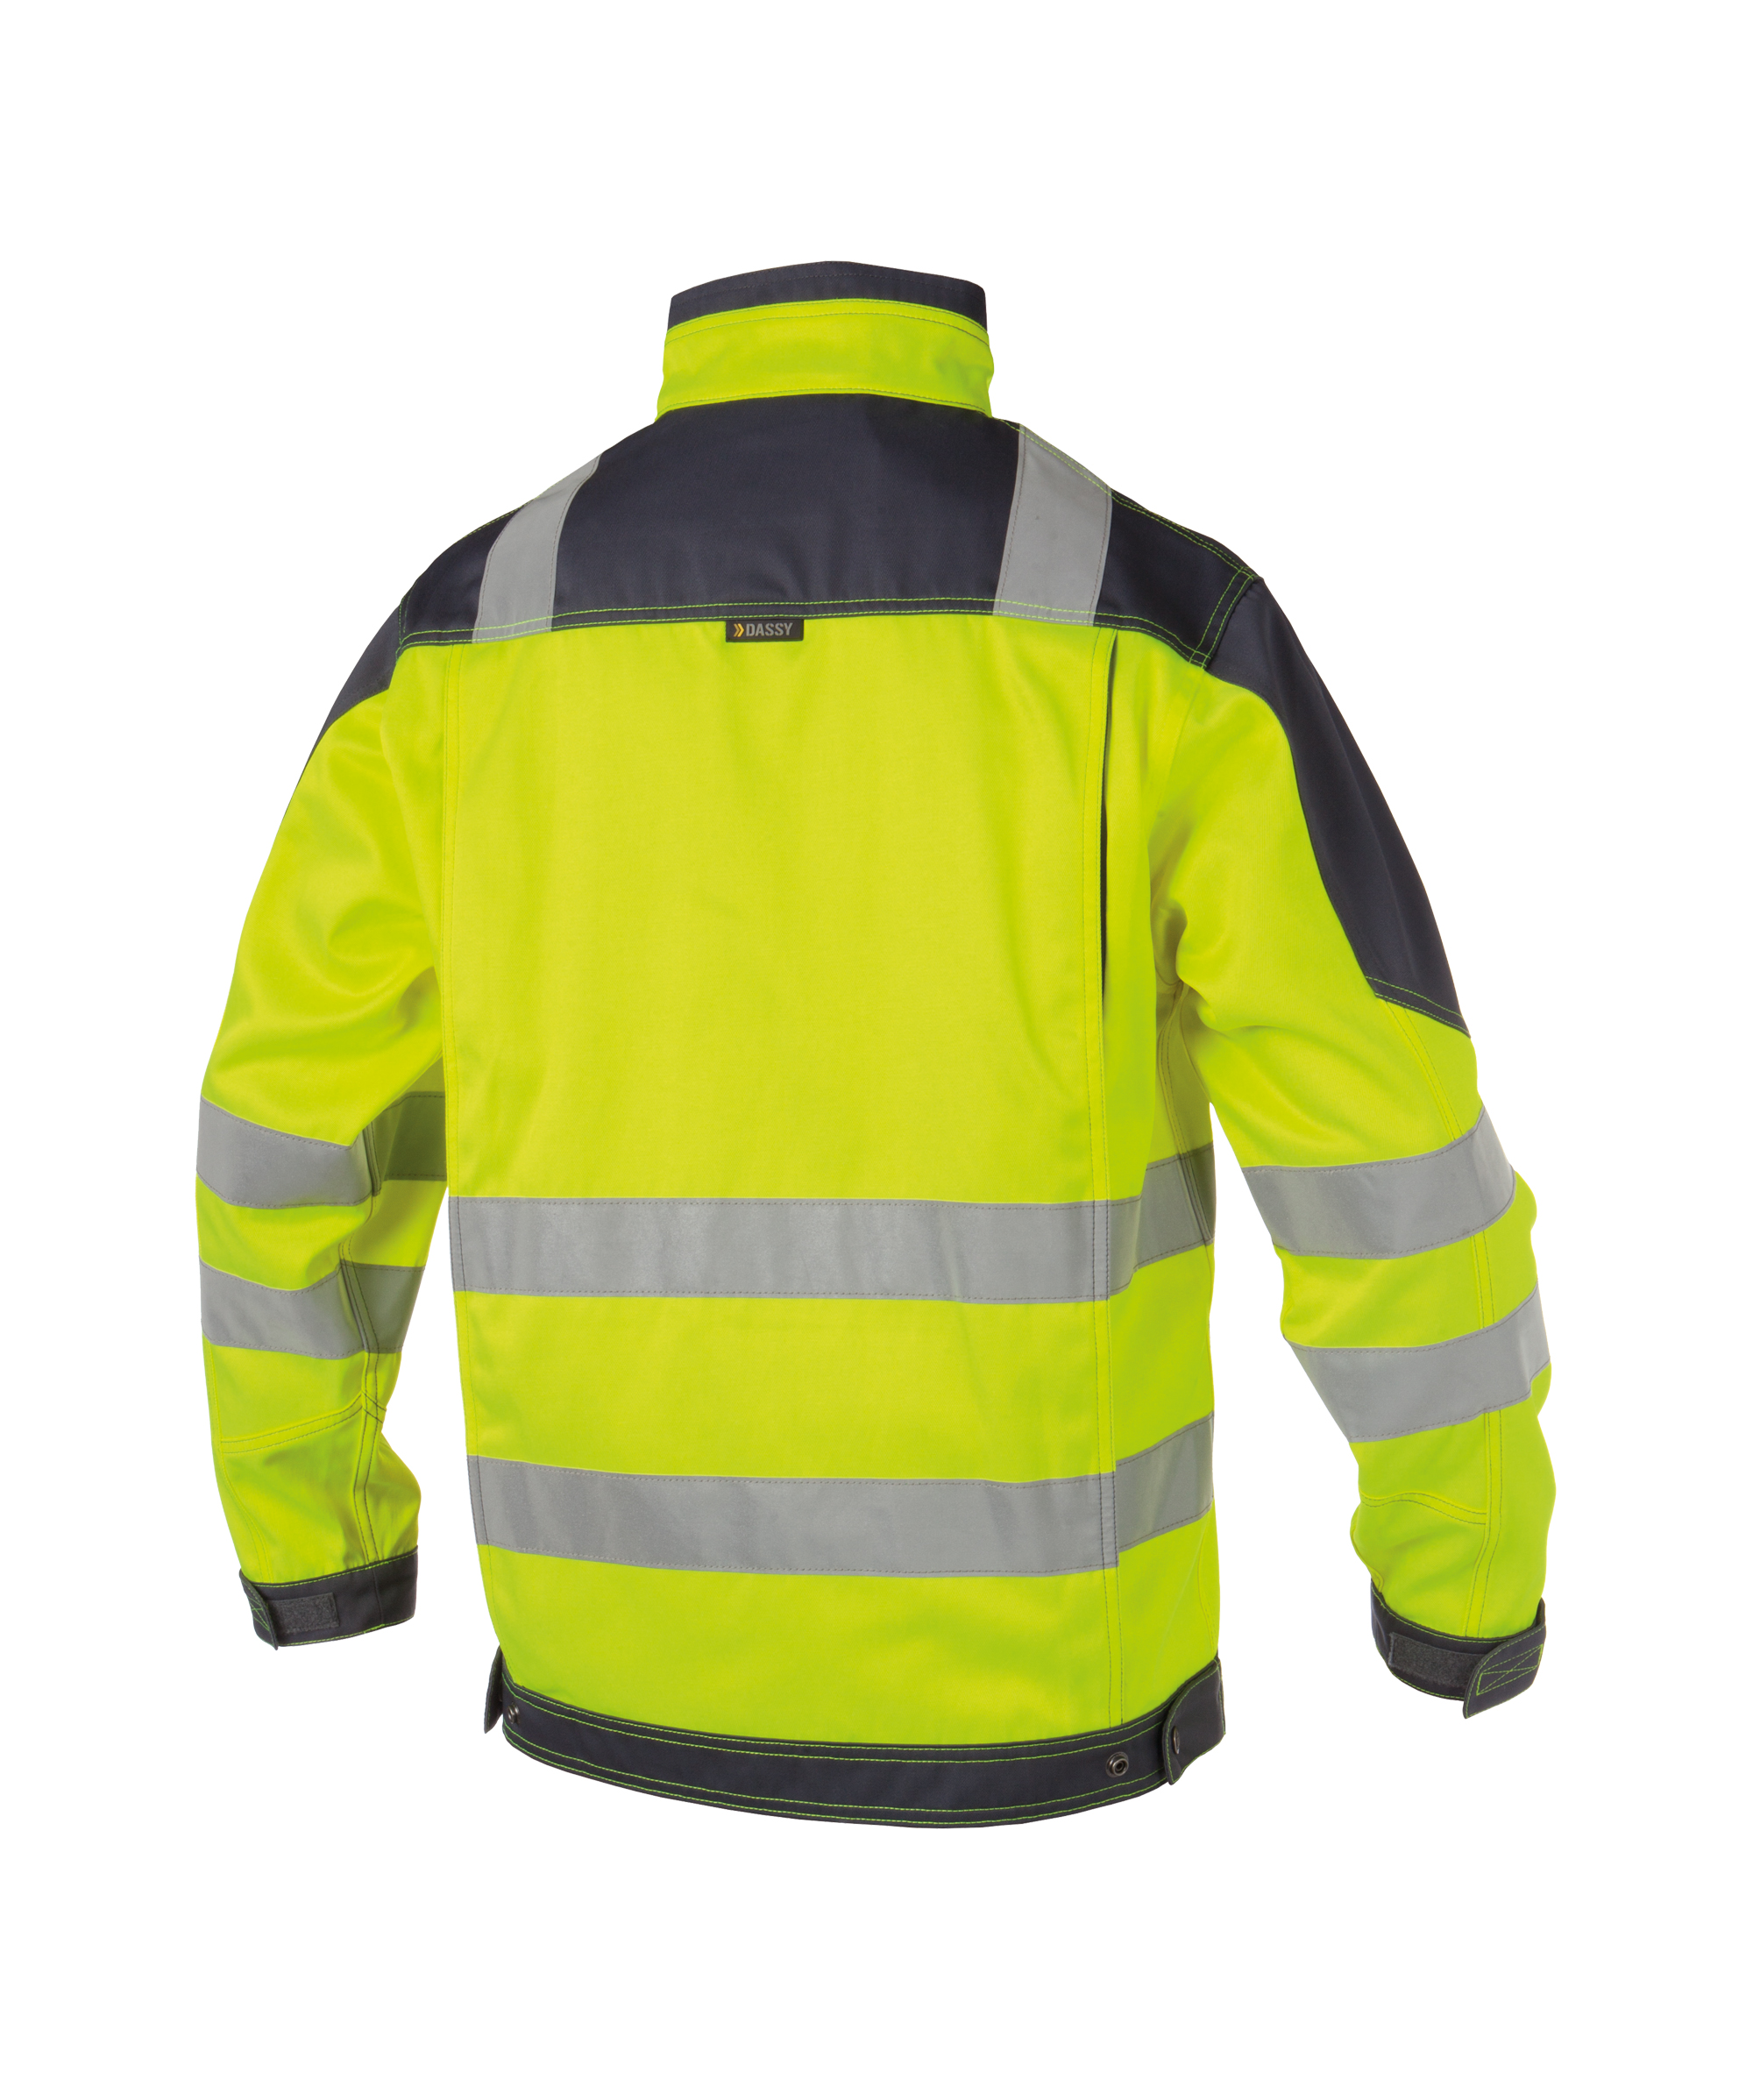 orlando_high-visibility-work-jacket_fluo-yellow-cement-grey_back.jpg